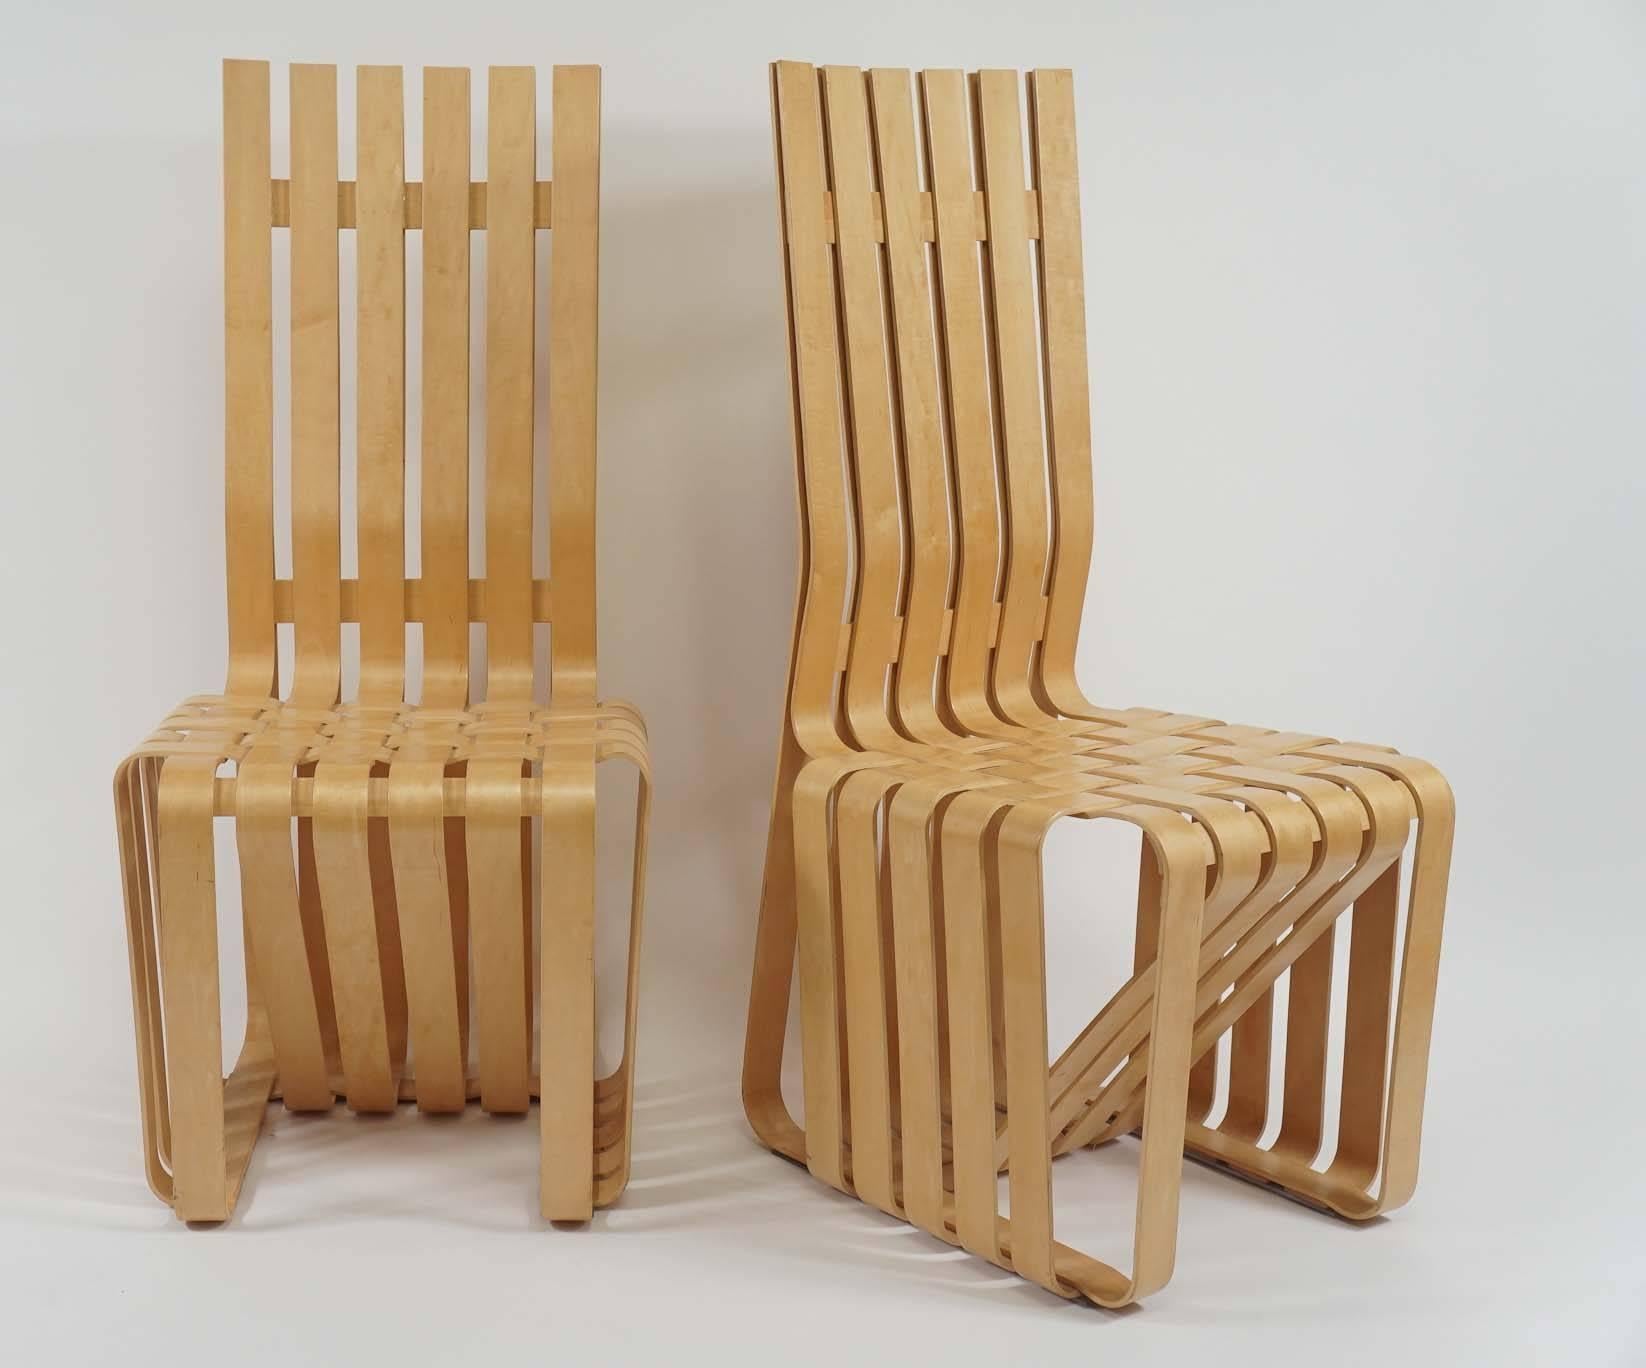 A wonderful pair of sculptural chairs by Frank Gehry. Inspired by the strength of apple crates, he created these woven bent maple chairs. They retain the Knoll and Gehry signature along with the date they were made. One is missing the plexi glide on